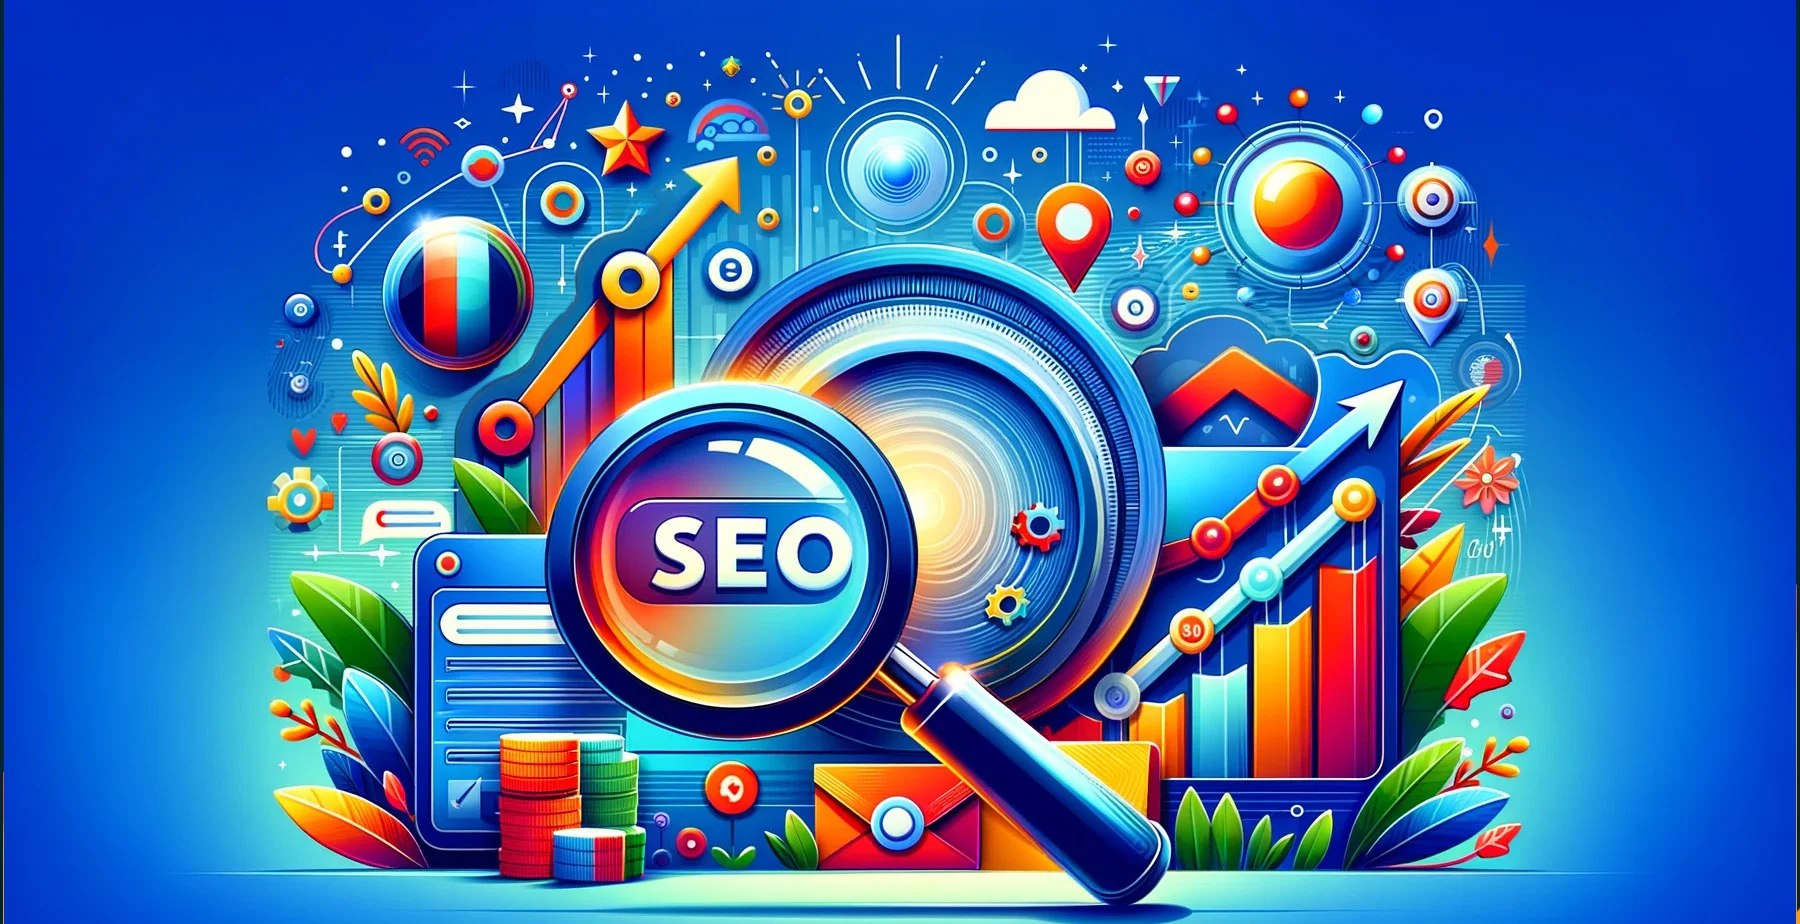 Boost SEO: Top Google Ranking Tips from Experts